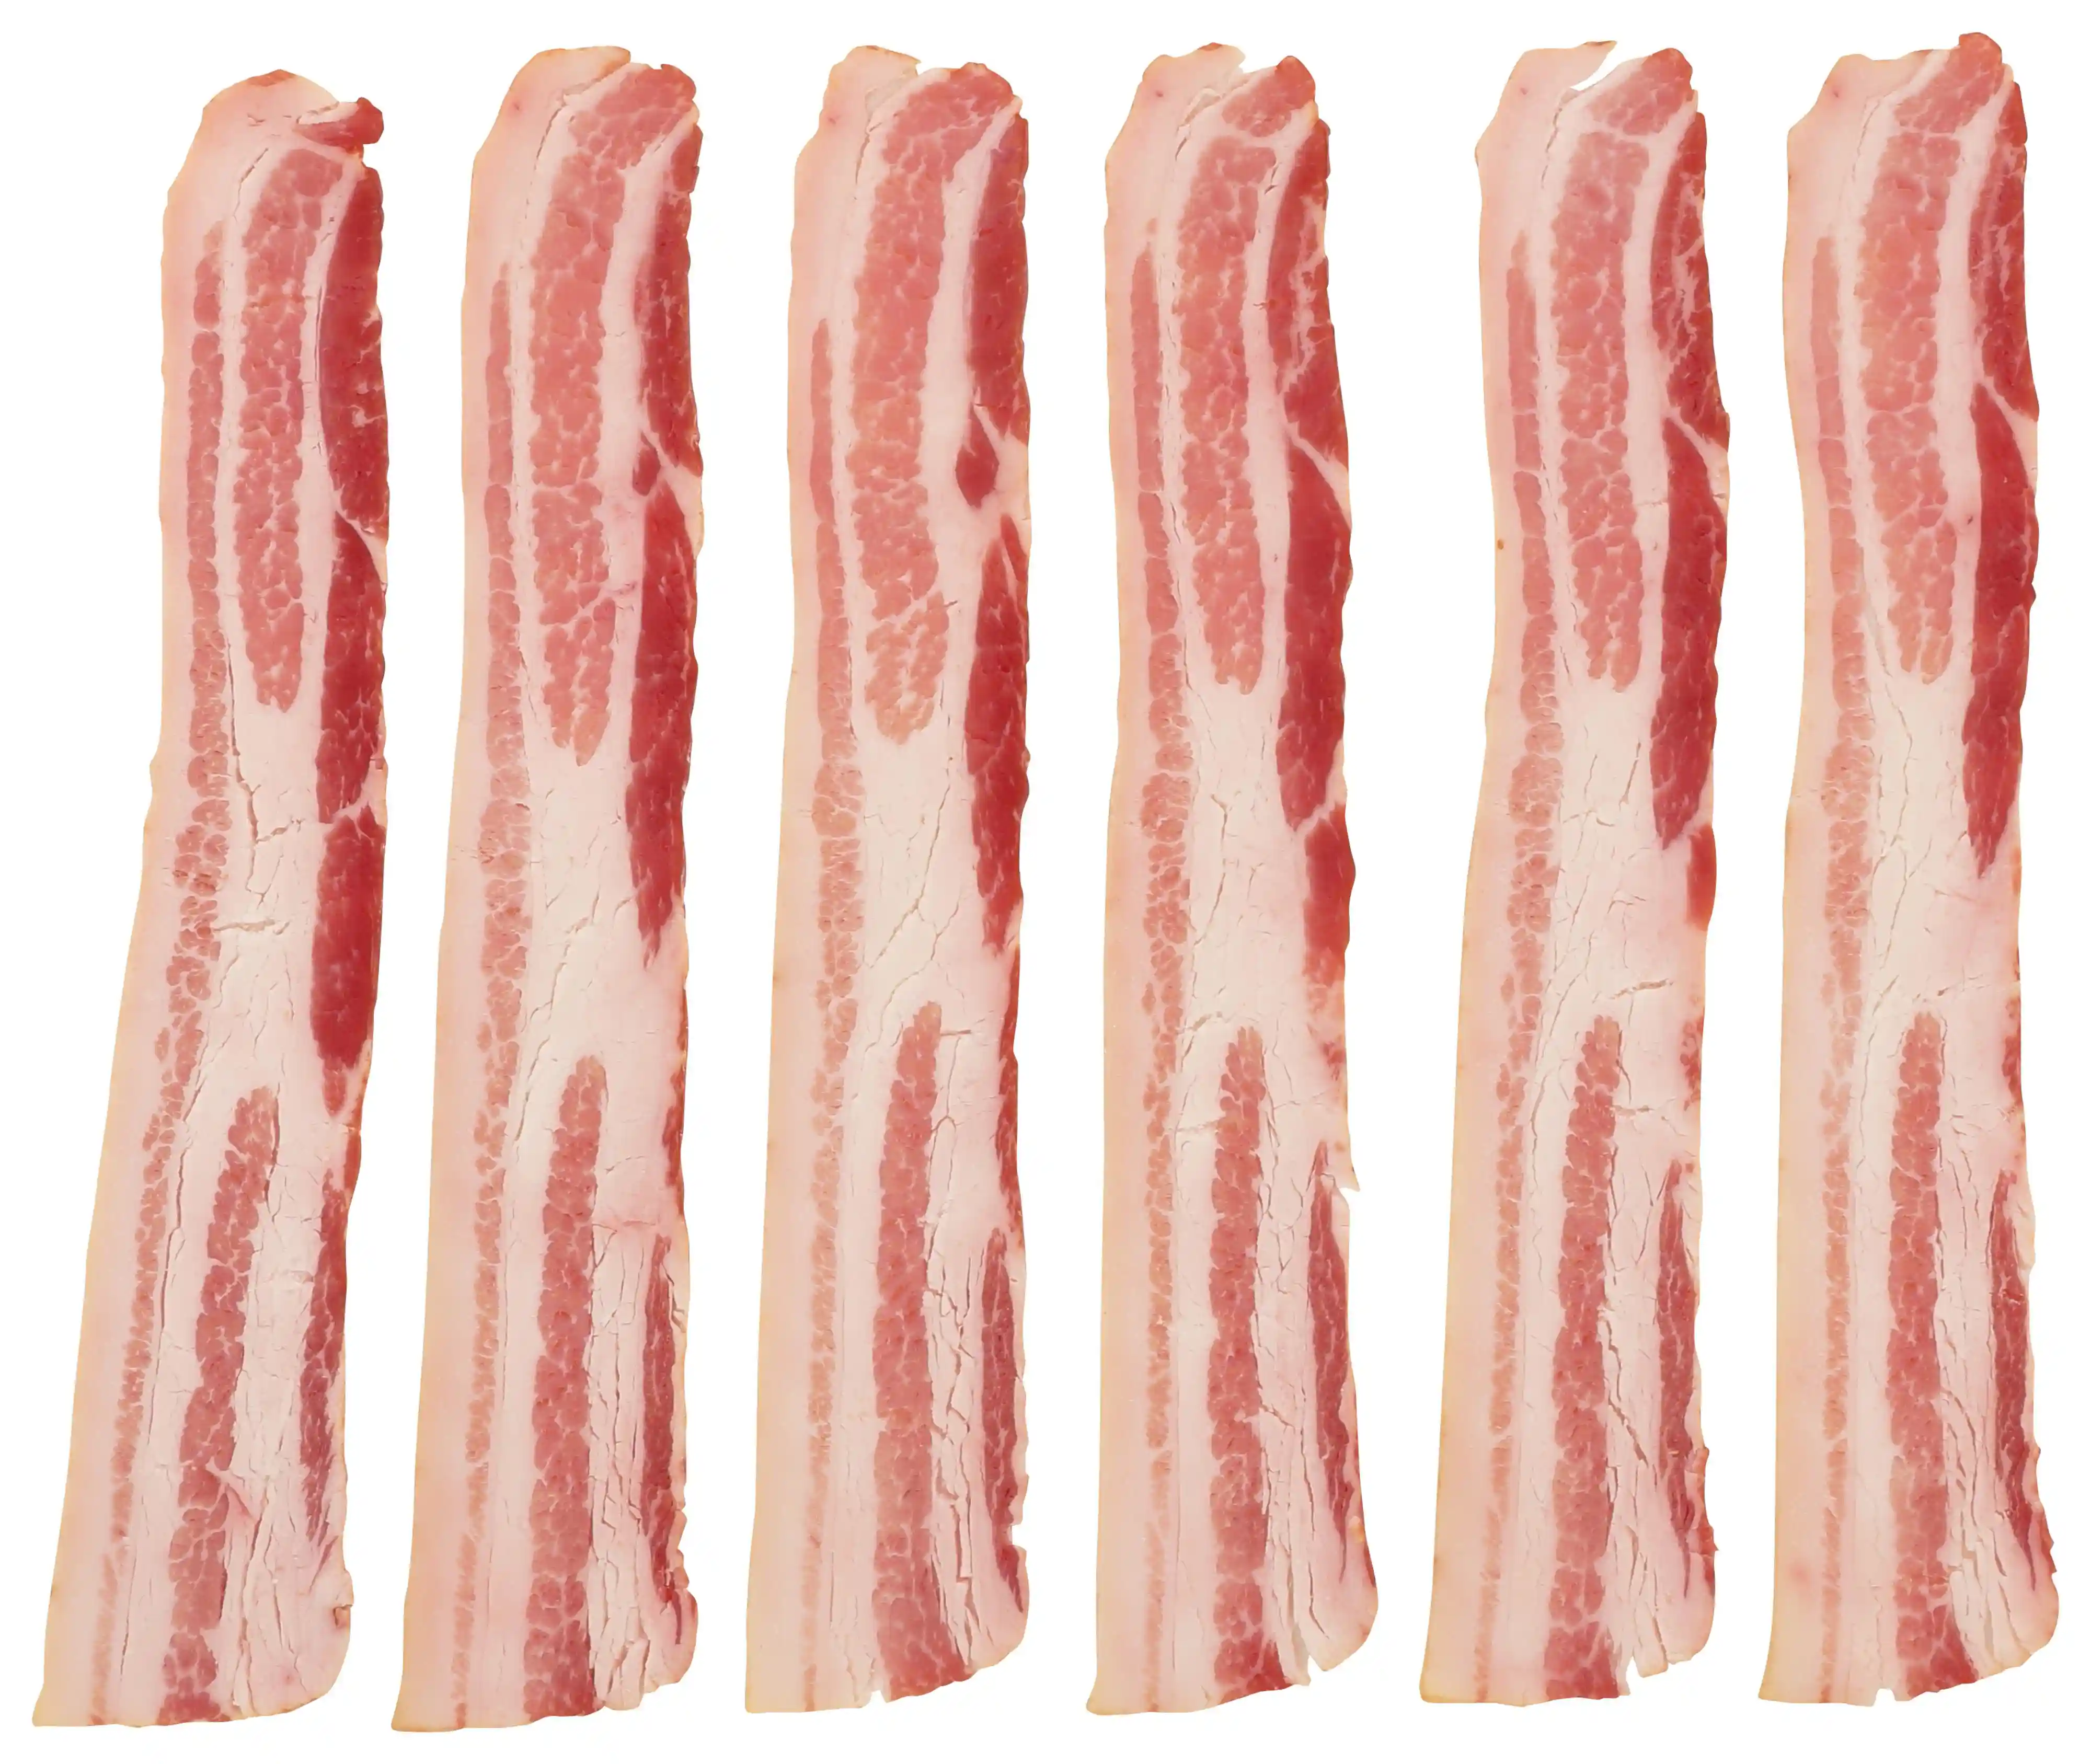 Wright® Brand Naturally Hickory Smoked Regular Sliced Bacon, Flat-Pack®, 15 Lbs, 14-18 Slices per Pound, Frozen_image_11